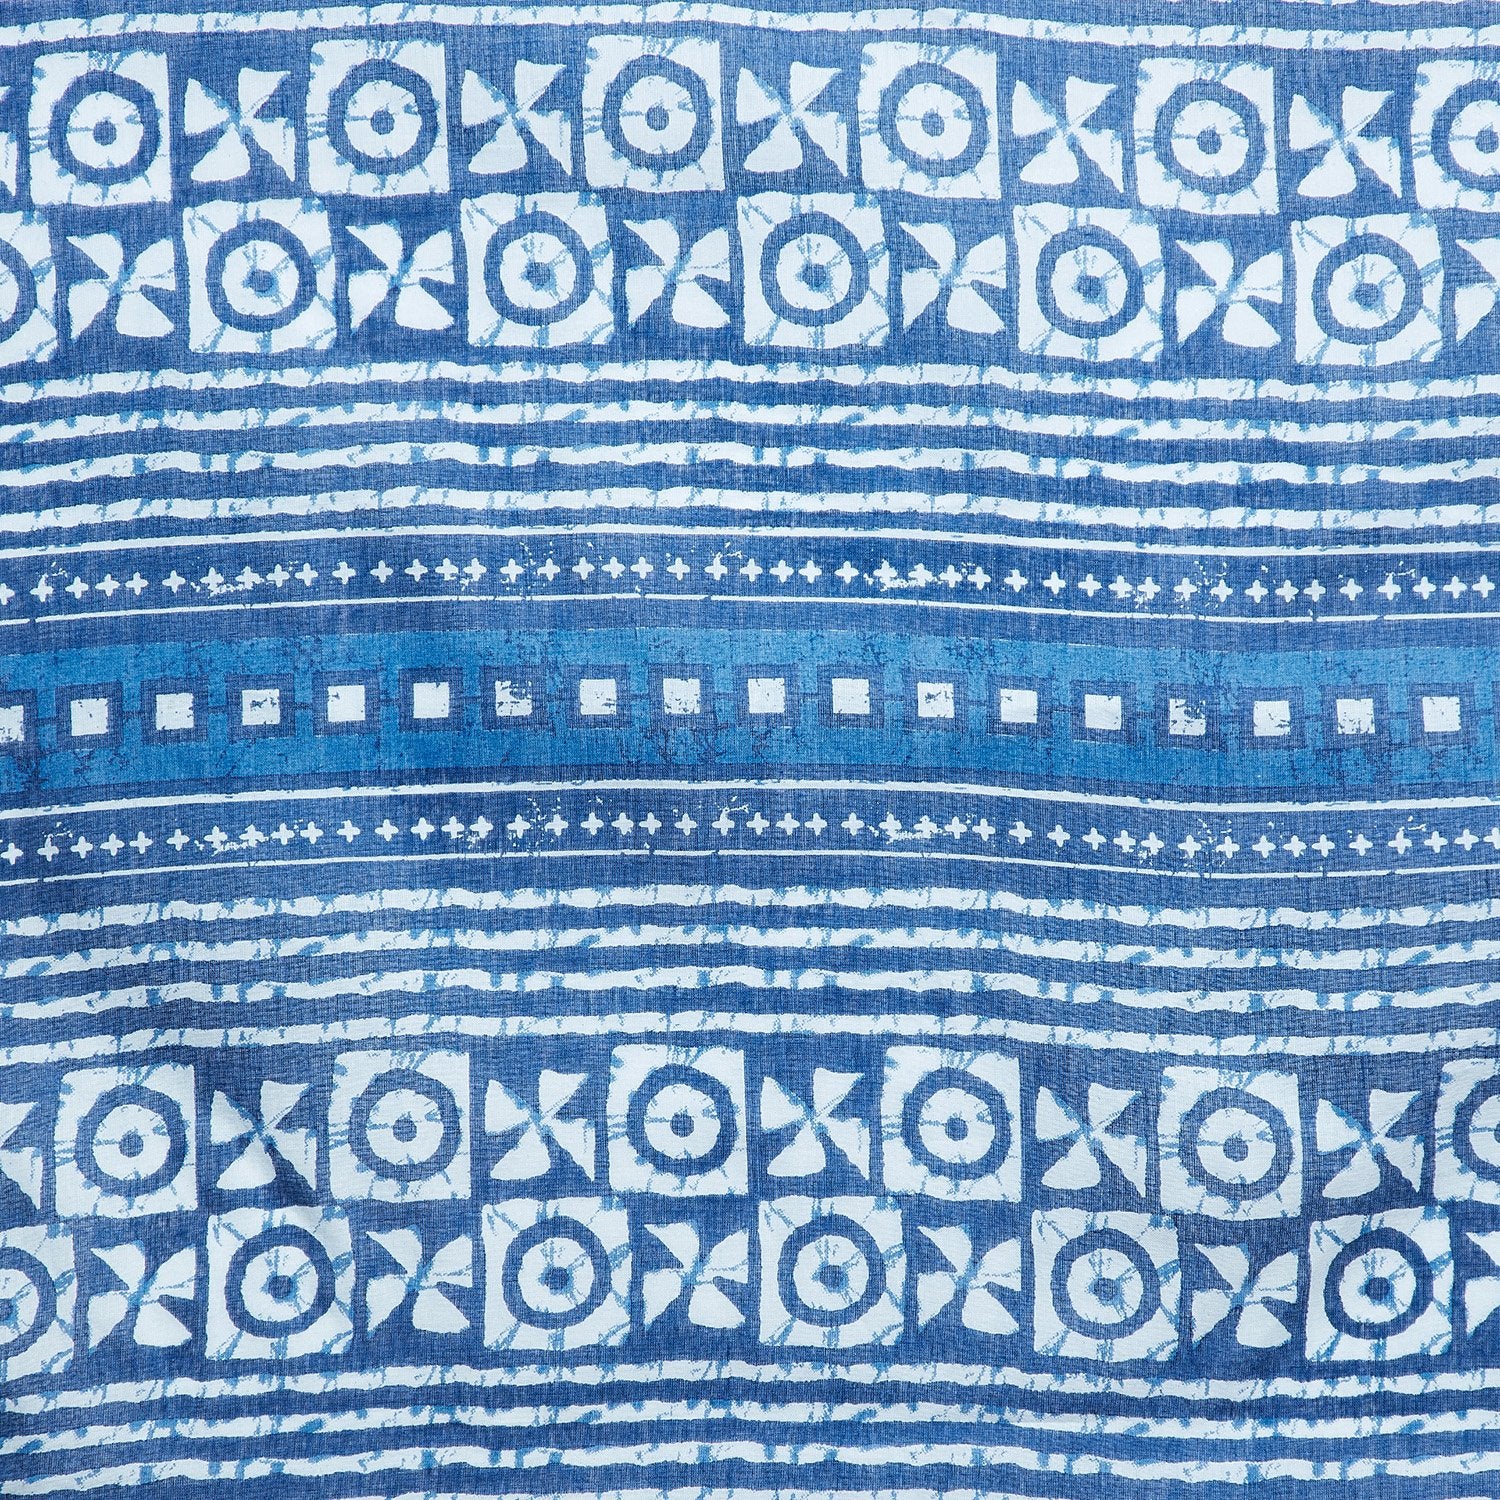 Blue Indigo Screen Print Handcrafted Cotton Saree-Saree-Kalakari India-RDSNSA0107-Cotton, Geographical Indication, Hand Blocks, Hand Crafted, Heritage Prints, Indigo, Sarees, Screen Print, Sustainable Fabrics-[Linen,Ethnic,wear,Fashionista,Handloom,Handicraft,Indigo,blockprint,block,print,Cotton,Chanderi,Blue, latest,classy,party,bollywood,trendy,summer,style,traditional,formal,elegant,unique,style,hand,block,print, dabu,booti,gift,present,glamorous,affordable,collectible,Sari,Saree,printed, hol